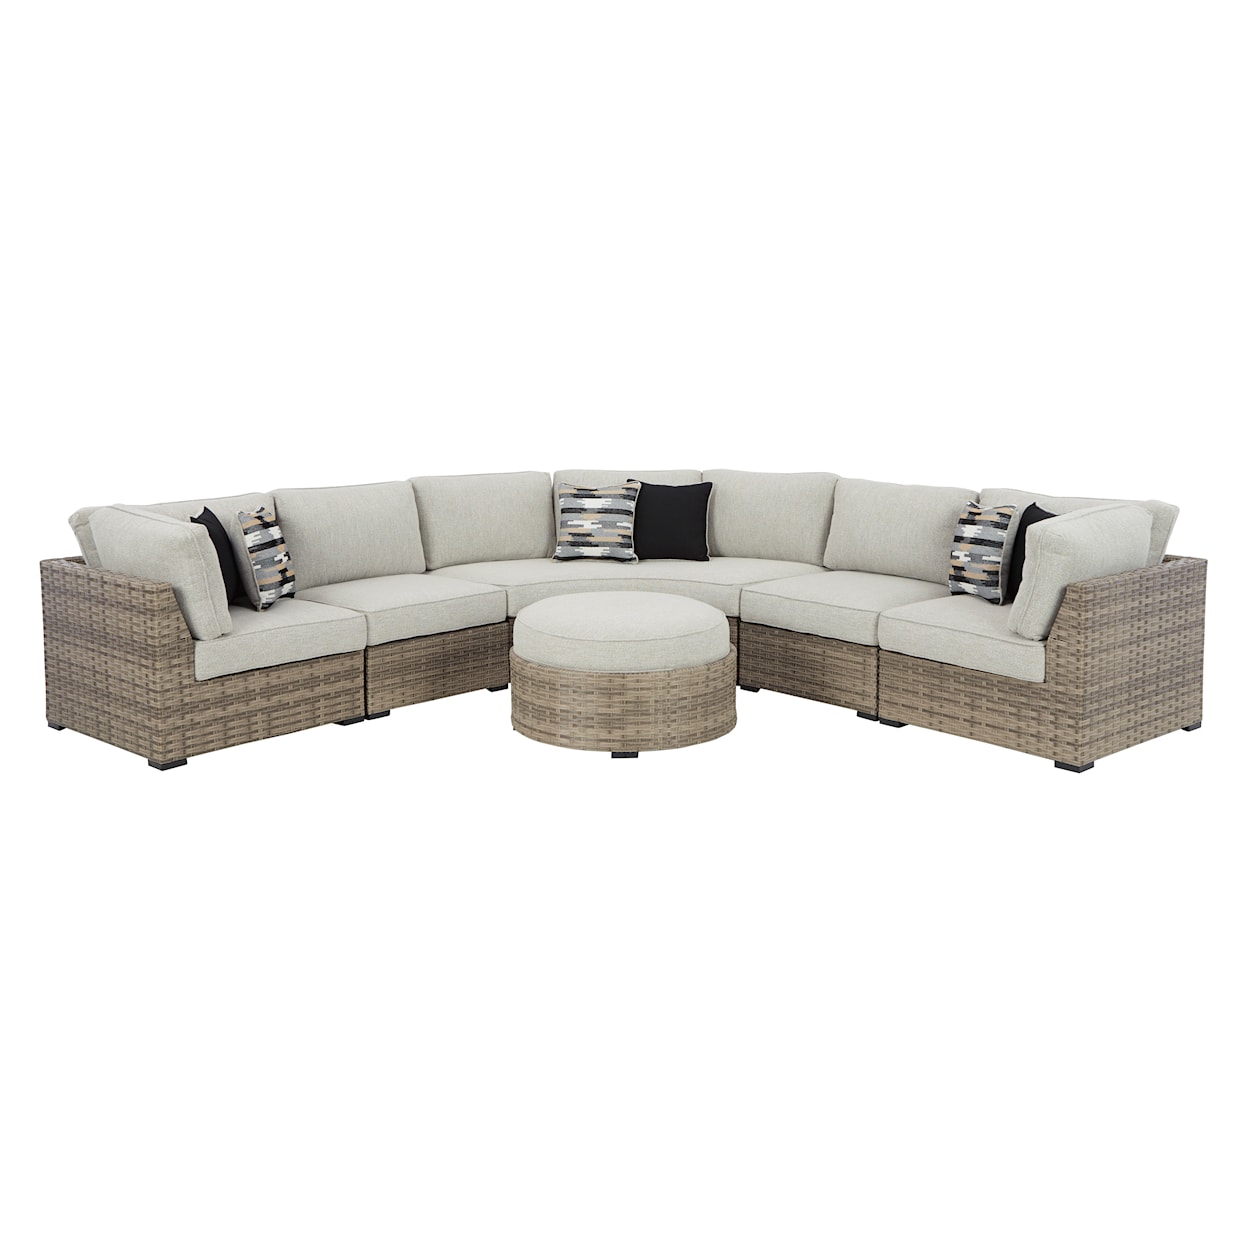 Signature Design by Ashley Calworth 4-Piece Outdoor Sectional